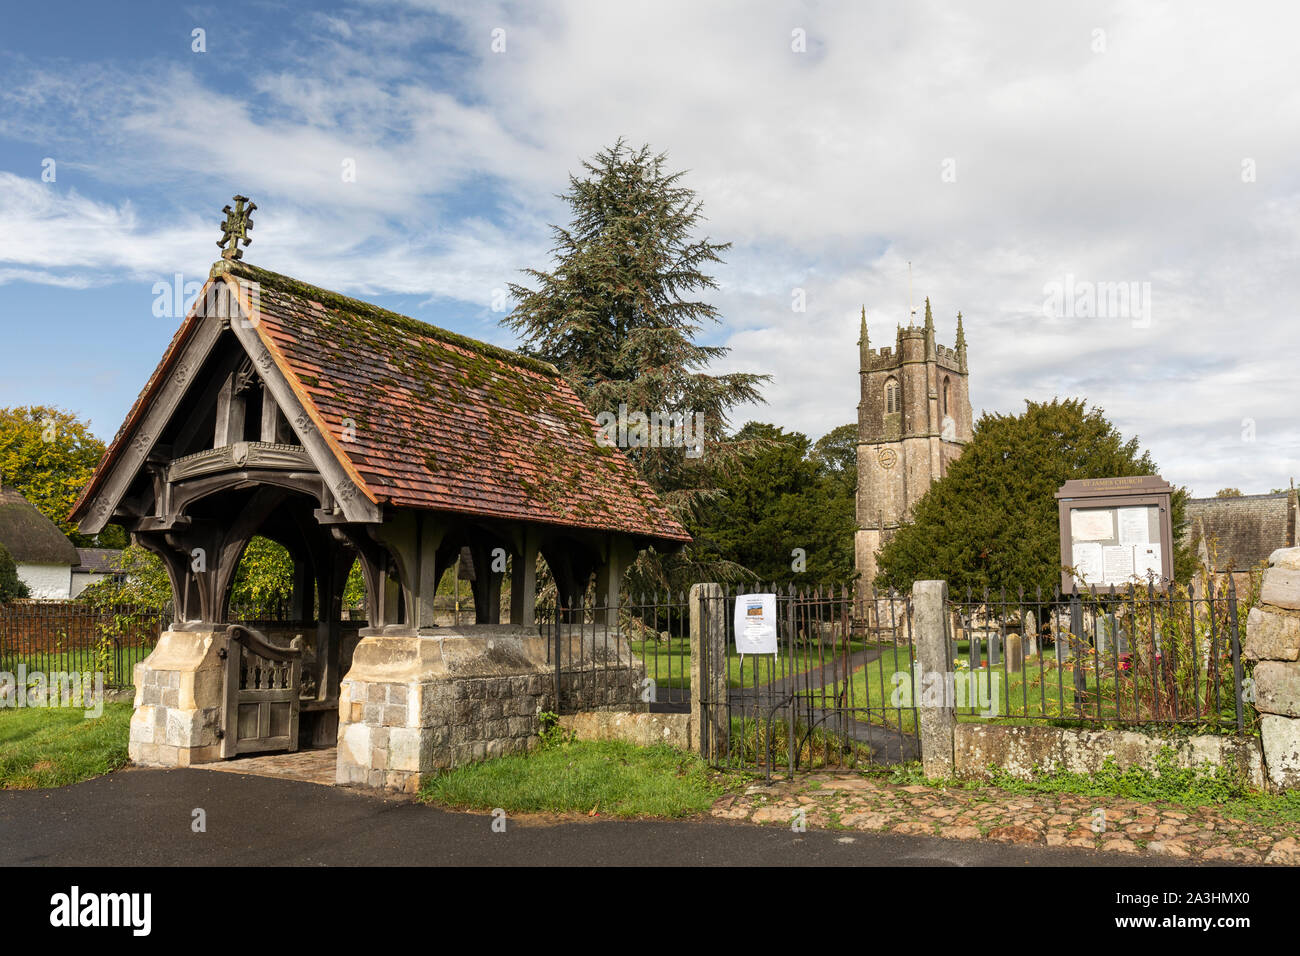 St James' Church and the lychgate which was erected in memory of Hannah Price and is a Grade II Listed Building, Avebury, Wiltshire, England, UK Stock Photo